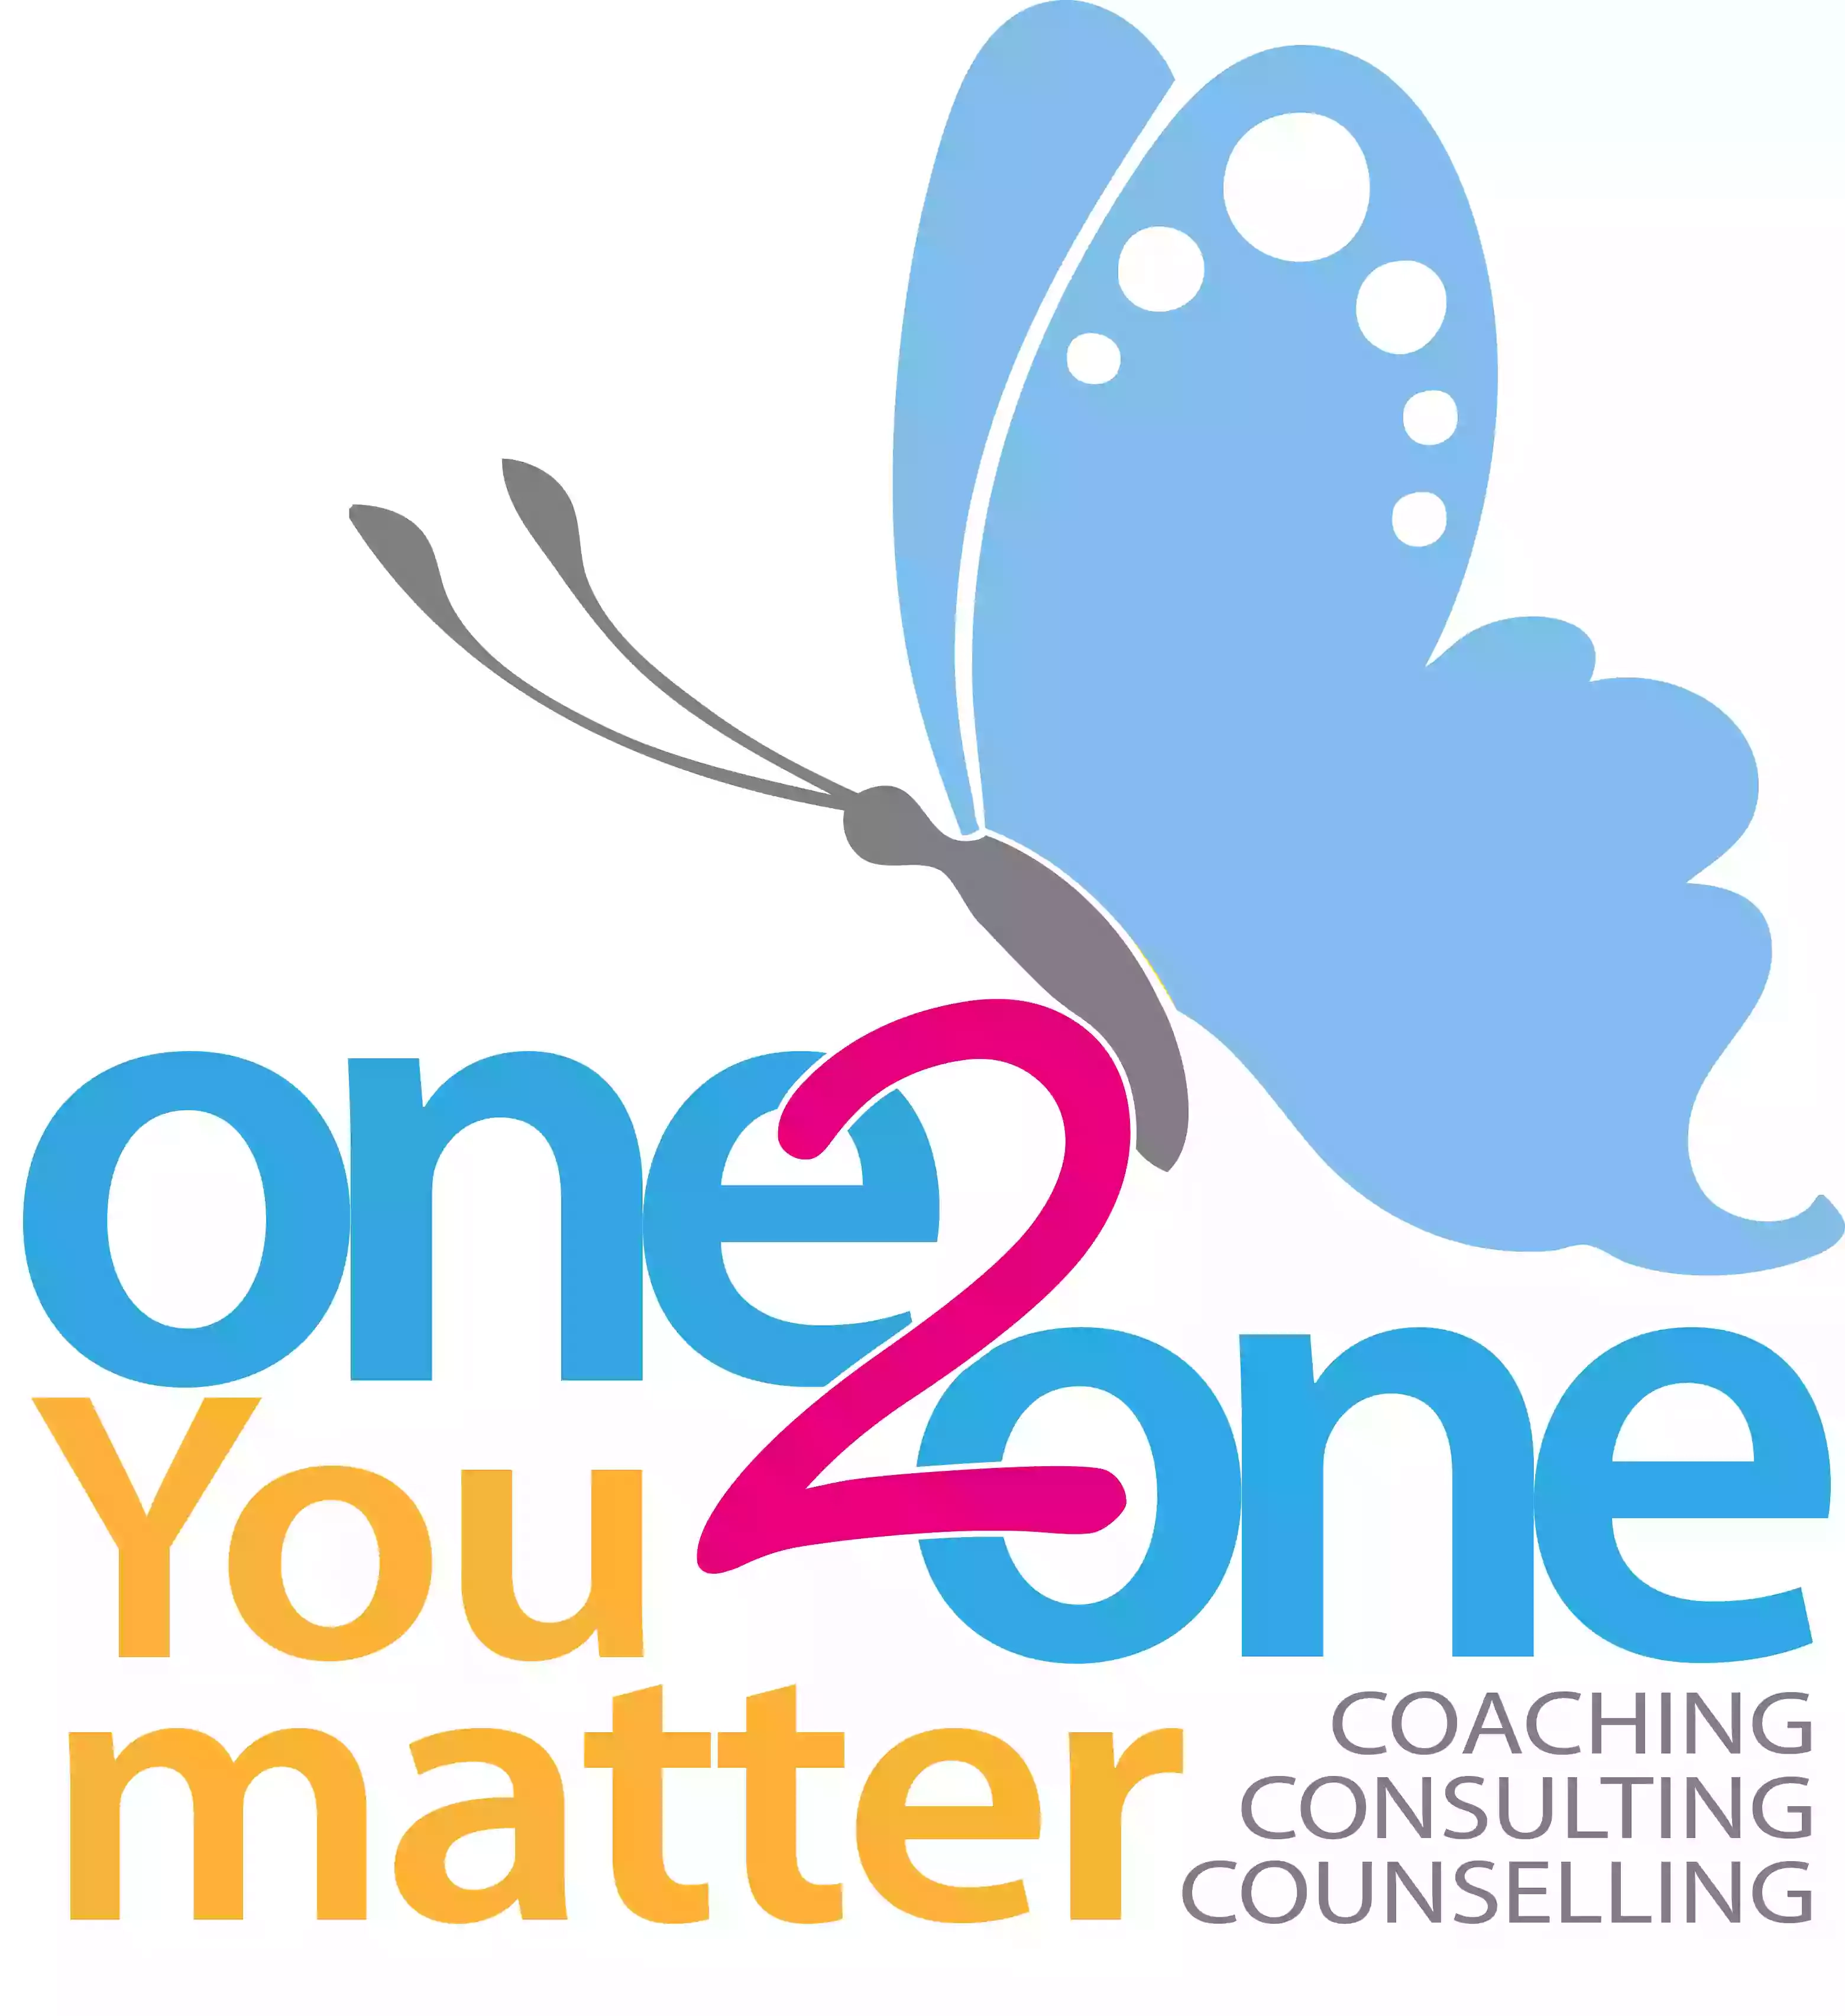 One 2 one you matter